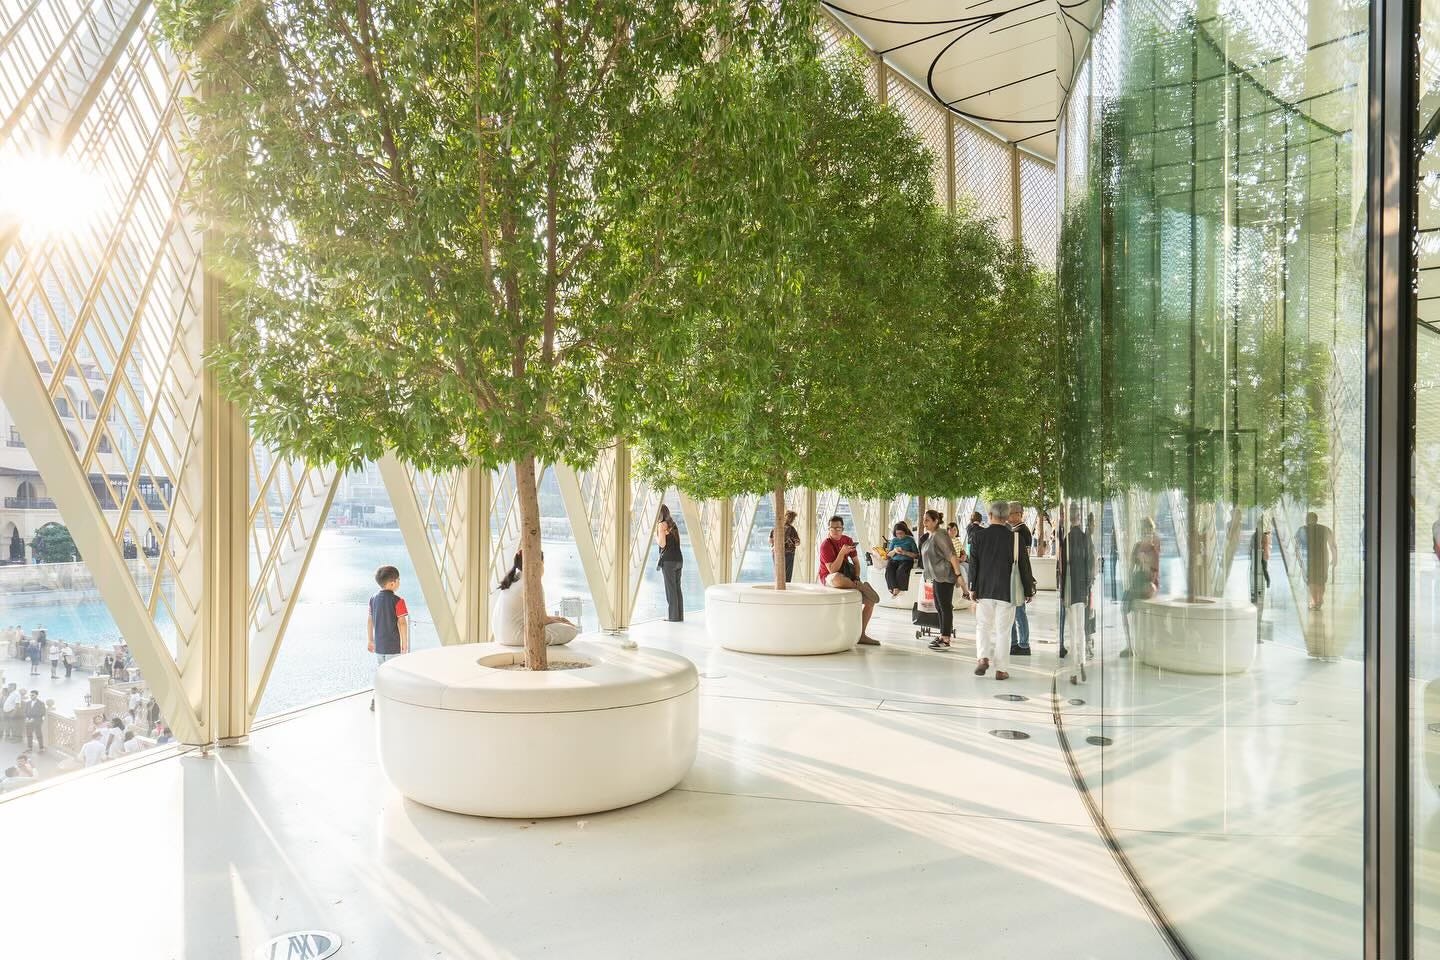 Customers stand below the trees at Apple Dubai Mall. The sun shines bright.